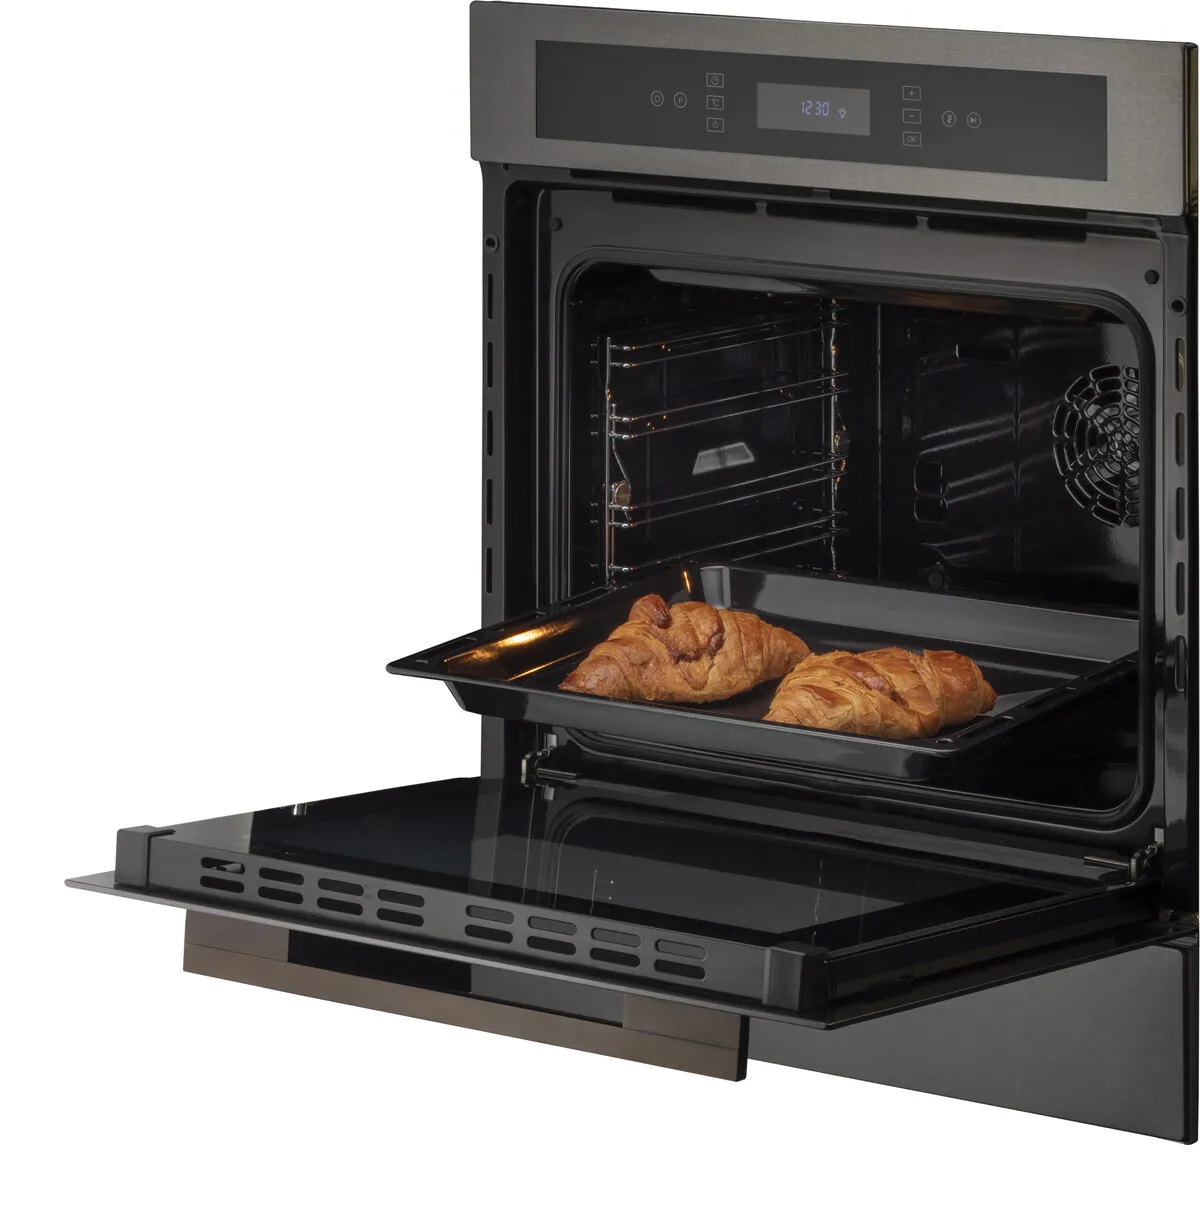 KAFF built-in combi steam oven from Mazzini series